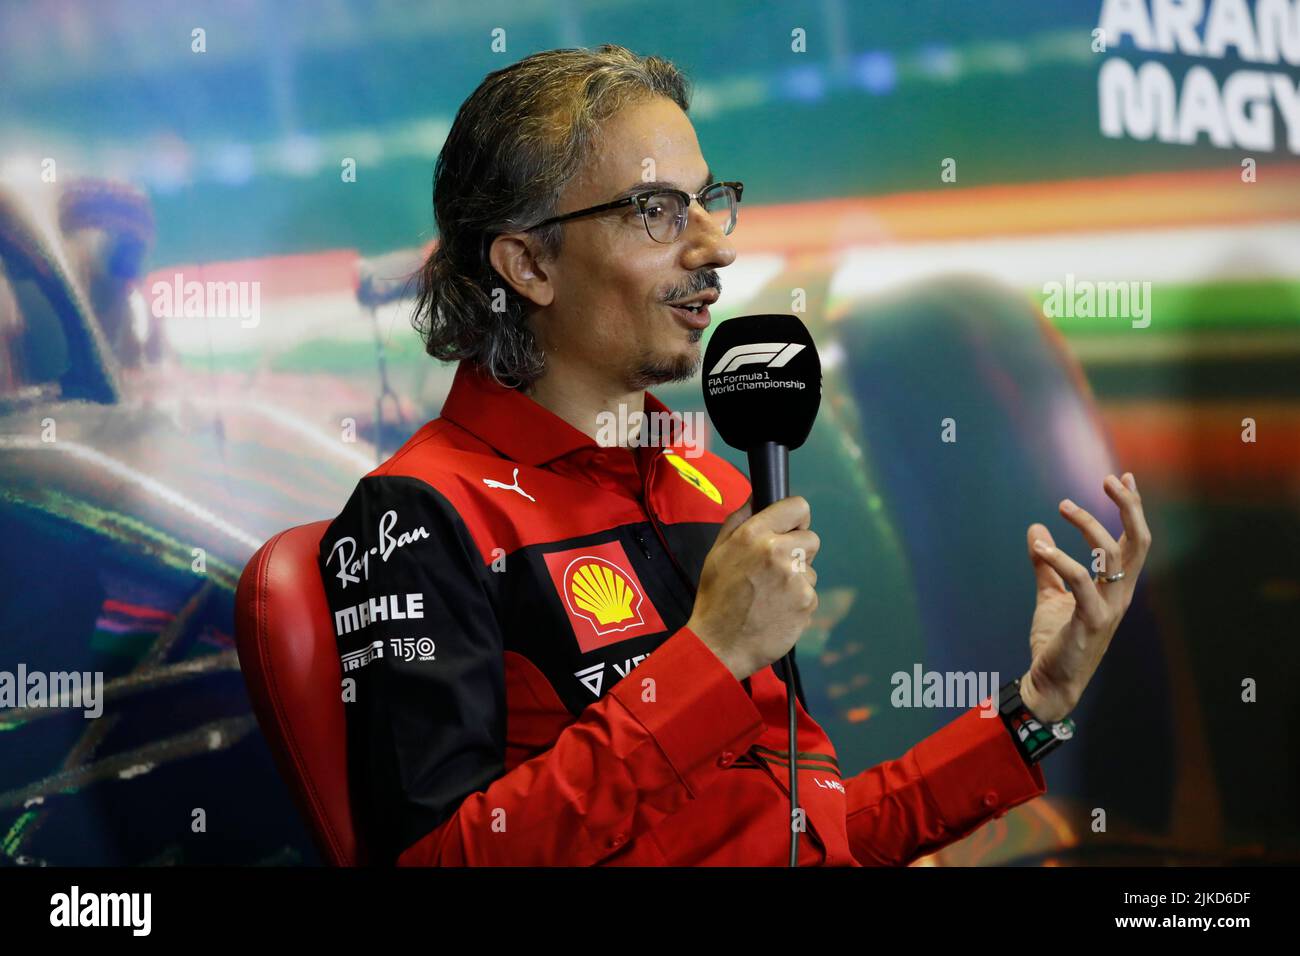 Mogyorod, Hungary. July 30th 2022. Formula 1 Hungarian Grand Prix at Hungaroring, Hungary. Pictured: Laurent Mekies, Racing Director and Head of Track Area of Scuderia Ferrari during press conference © Piotr Zajac/Alamy Live News Stock Photo